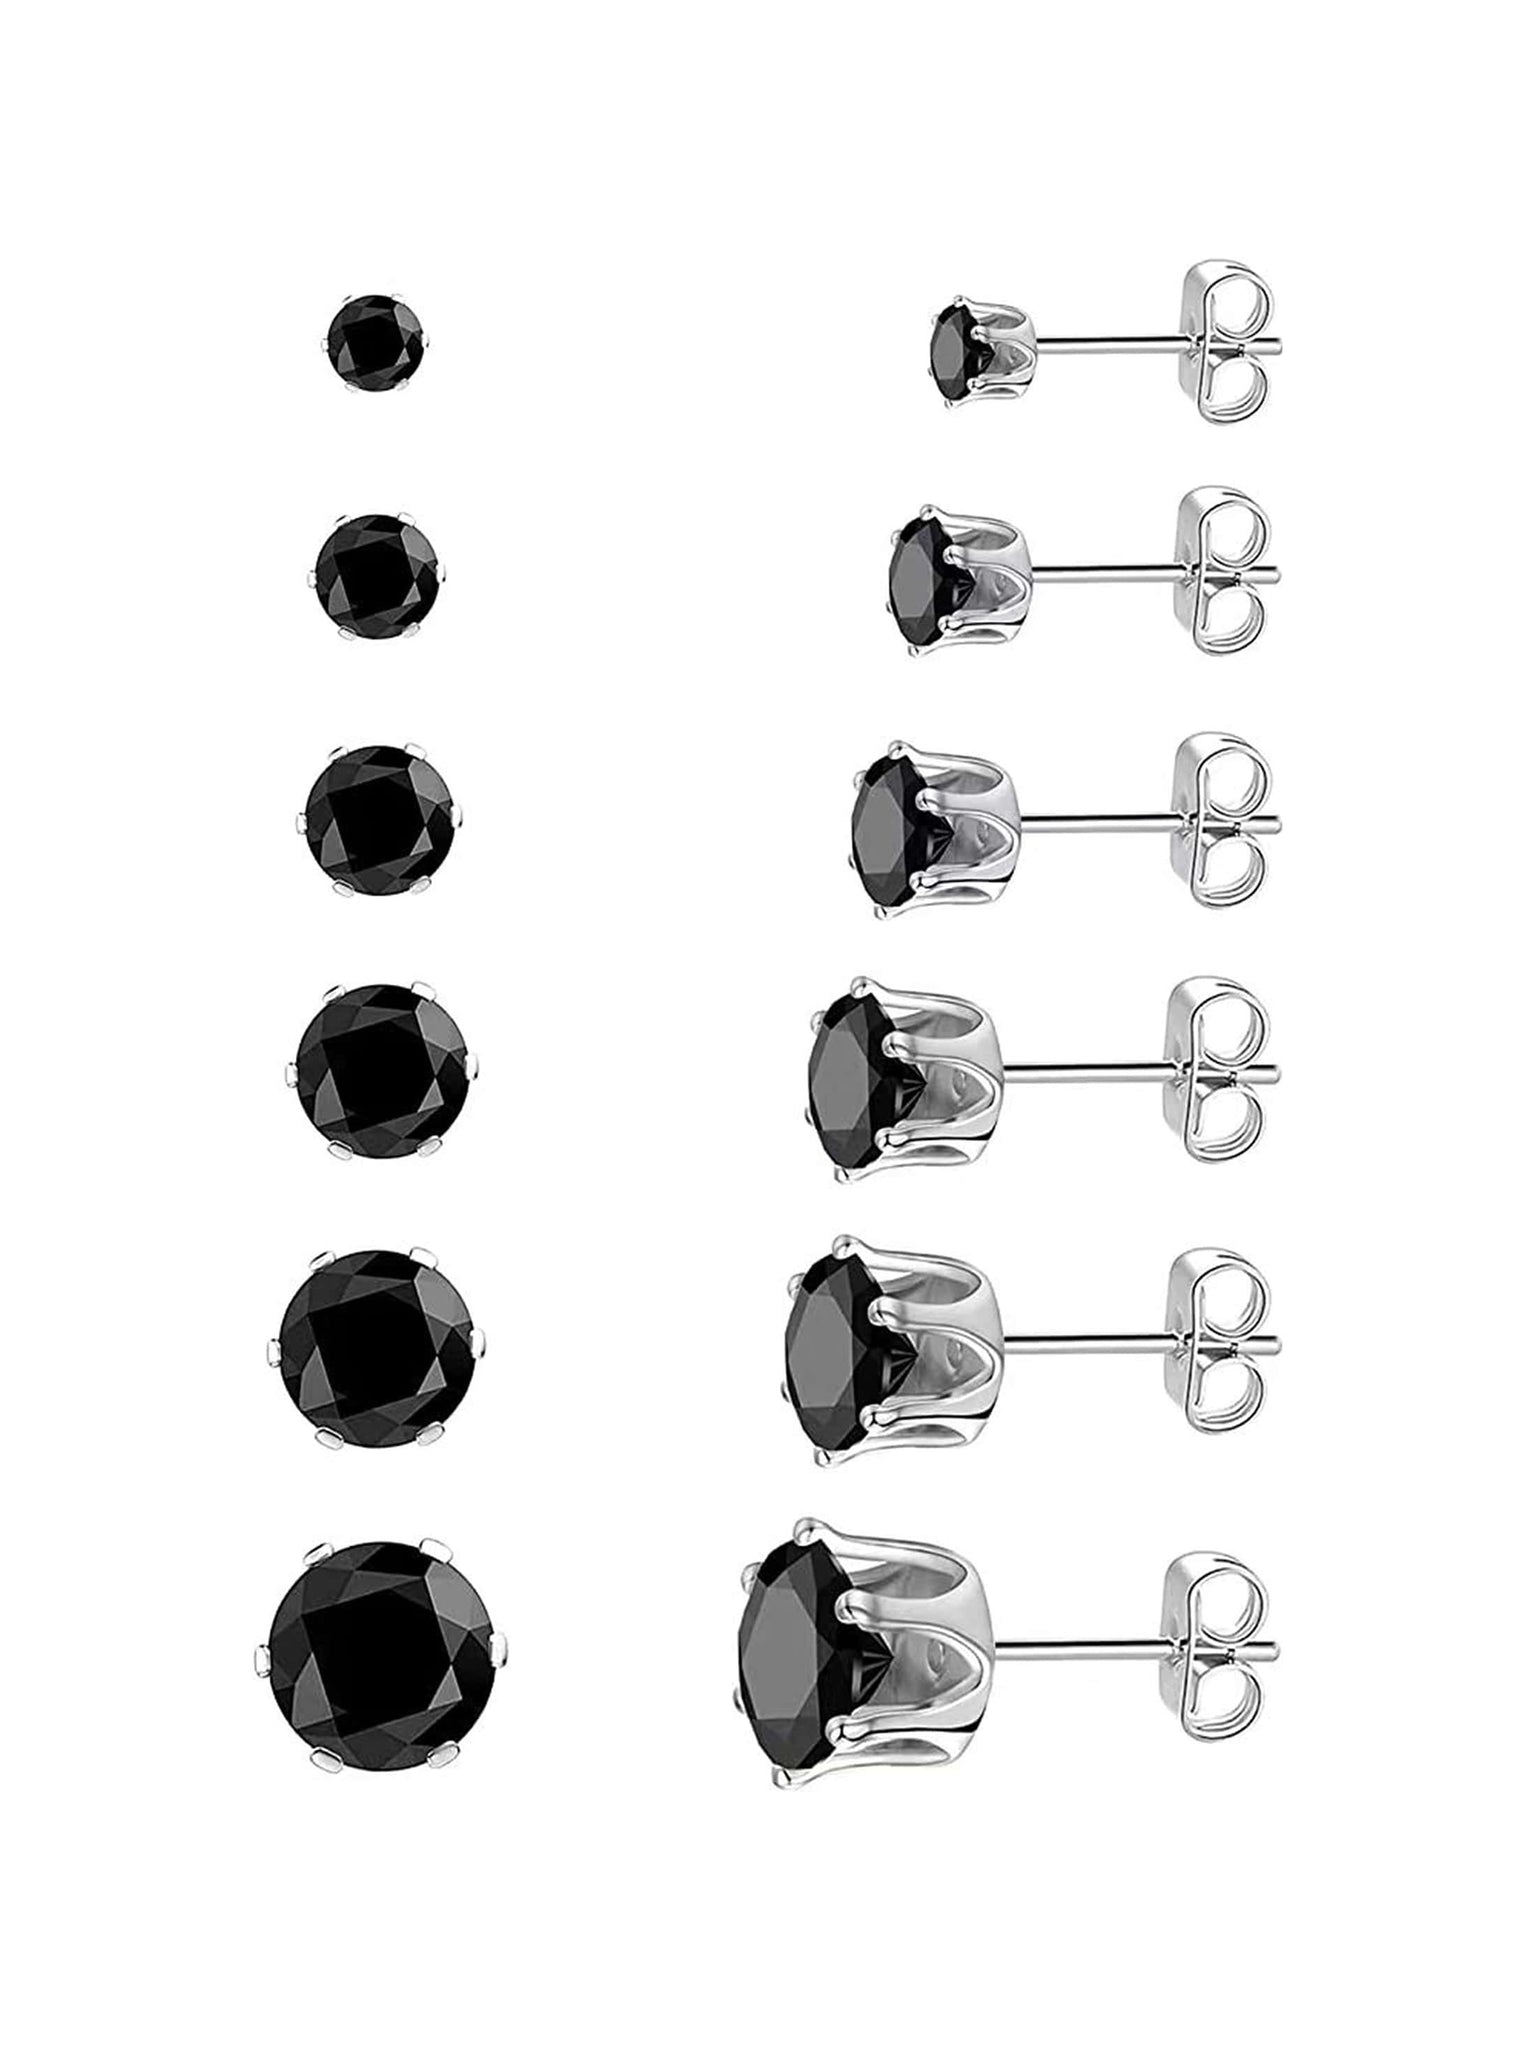 1 Pair/6 Pairs Of 316l Hypoallergenic Stainless Steel Earrings, Hypoallergenic Cubic Ia Six-Prong Aaa Black Earrings, Simple And Versatile Earrings With Diamonds, Fashionable Trend Earrings, Unisex Style, Sparkling Titanium Steel Earrings